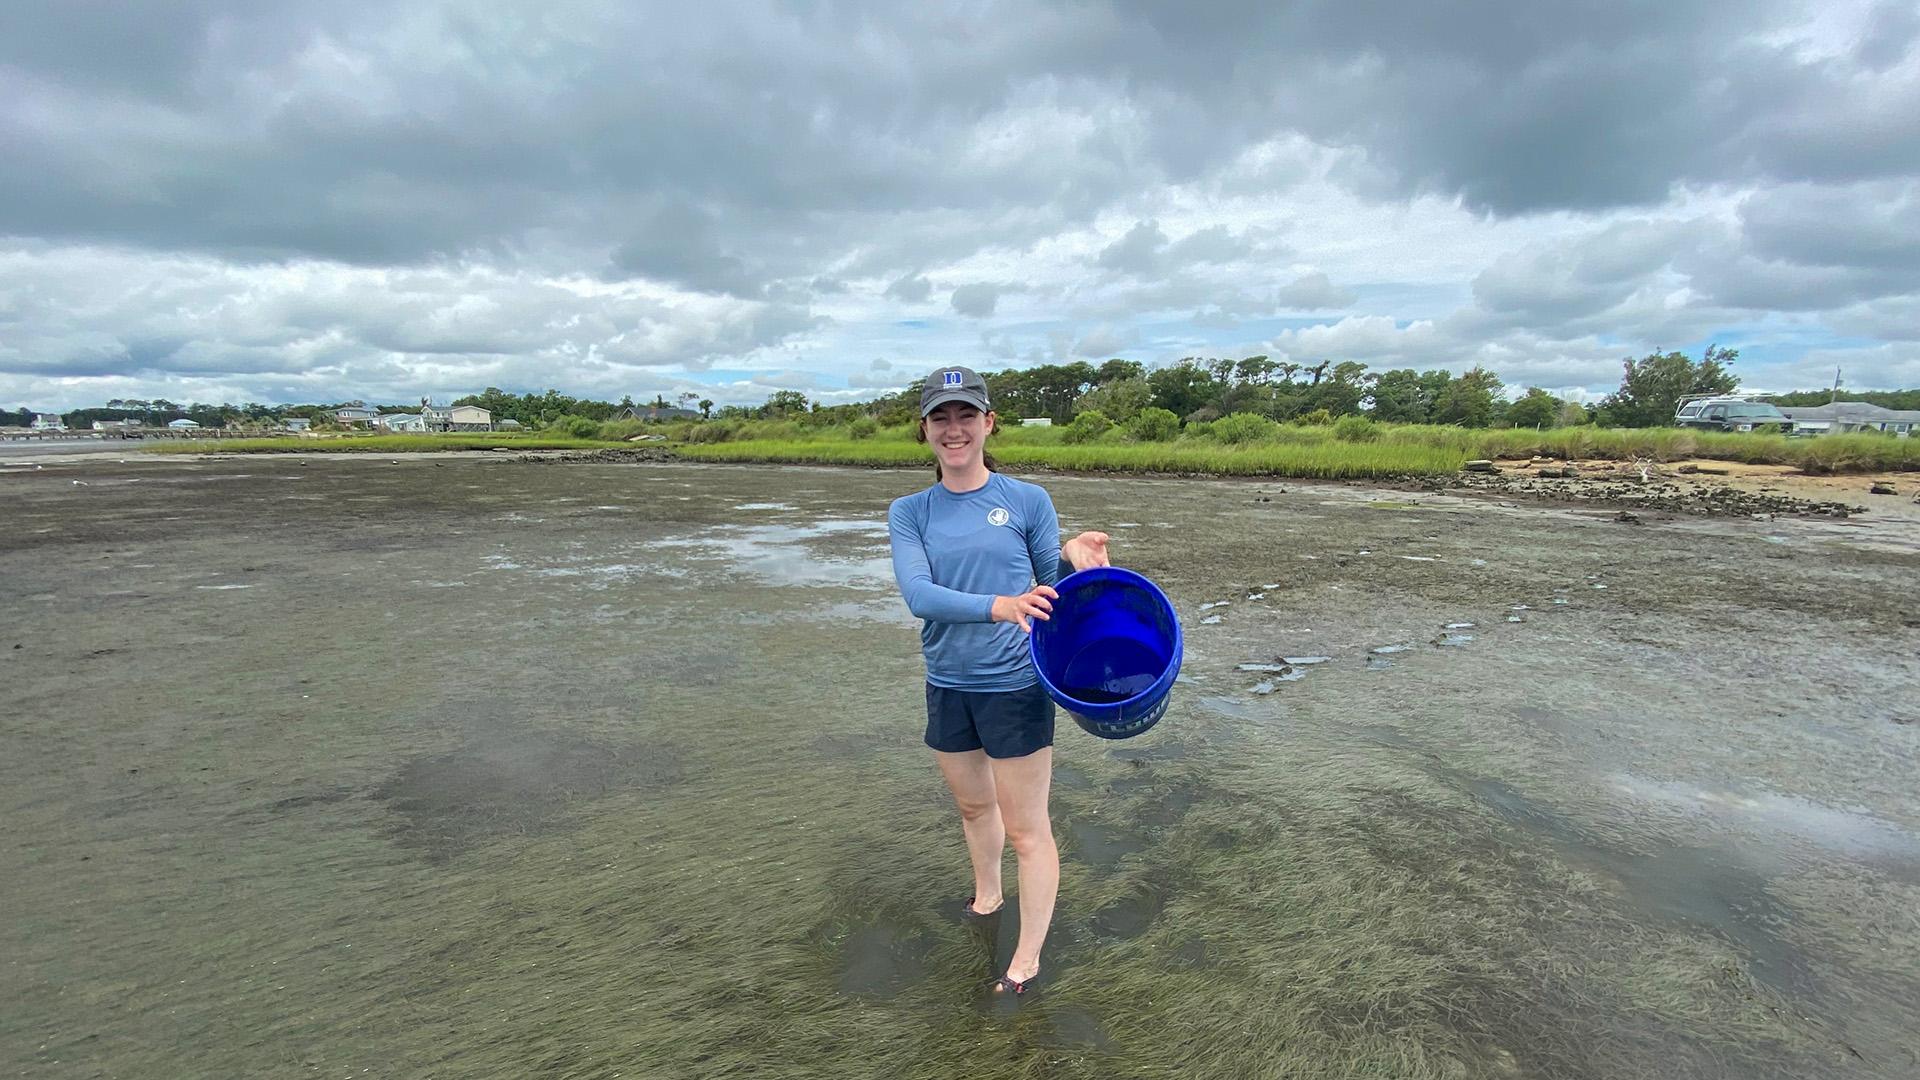 Chloe holding bucket in shallow water